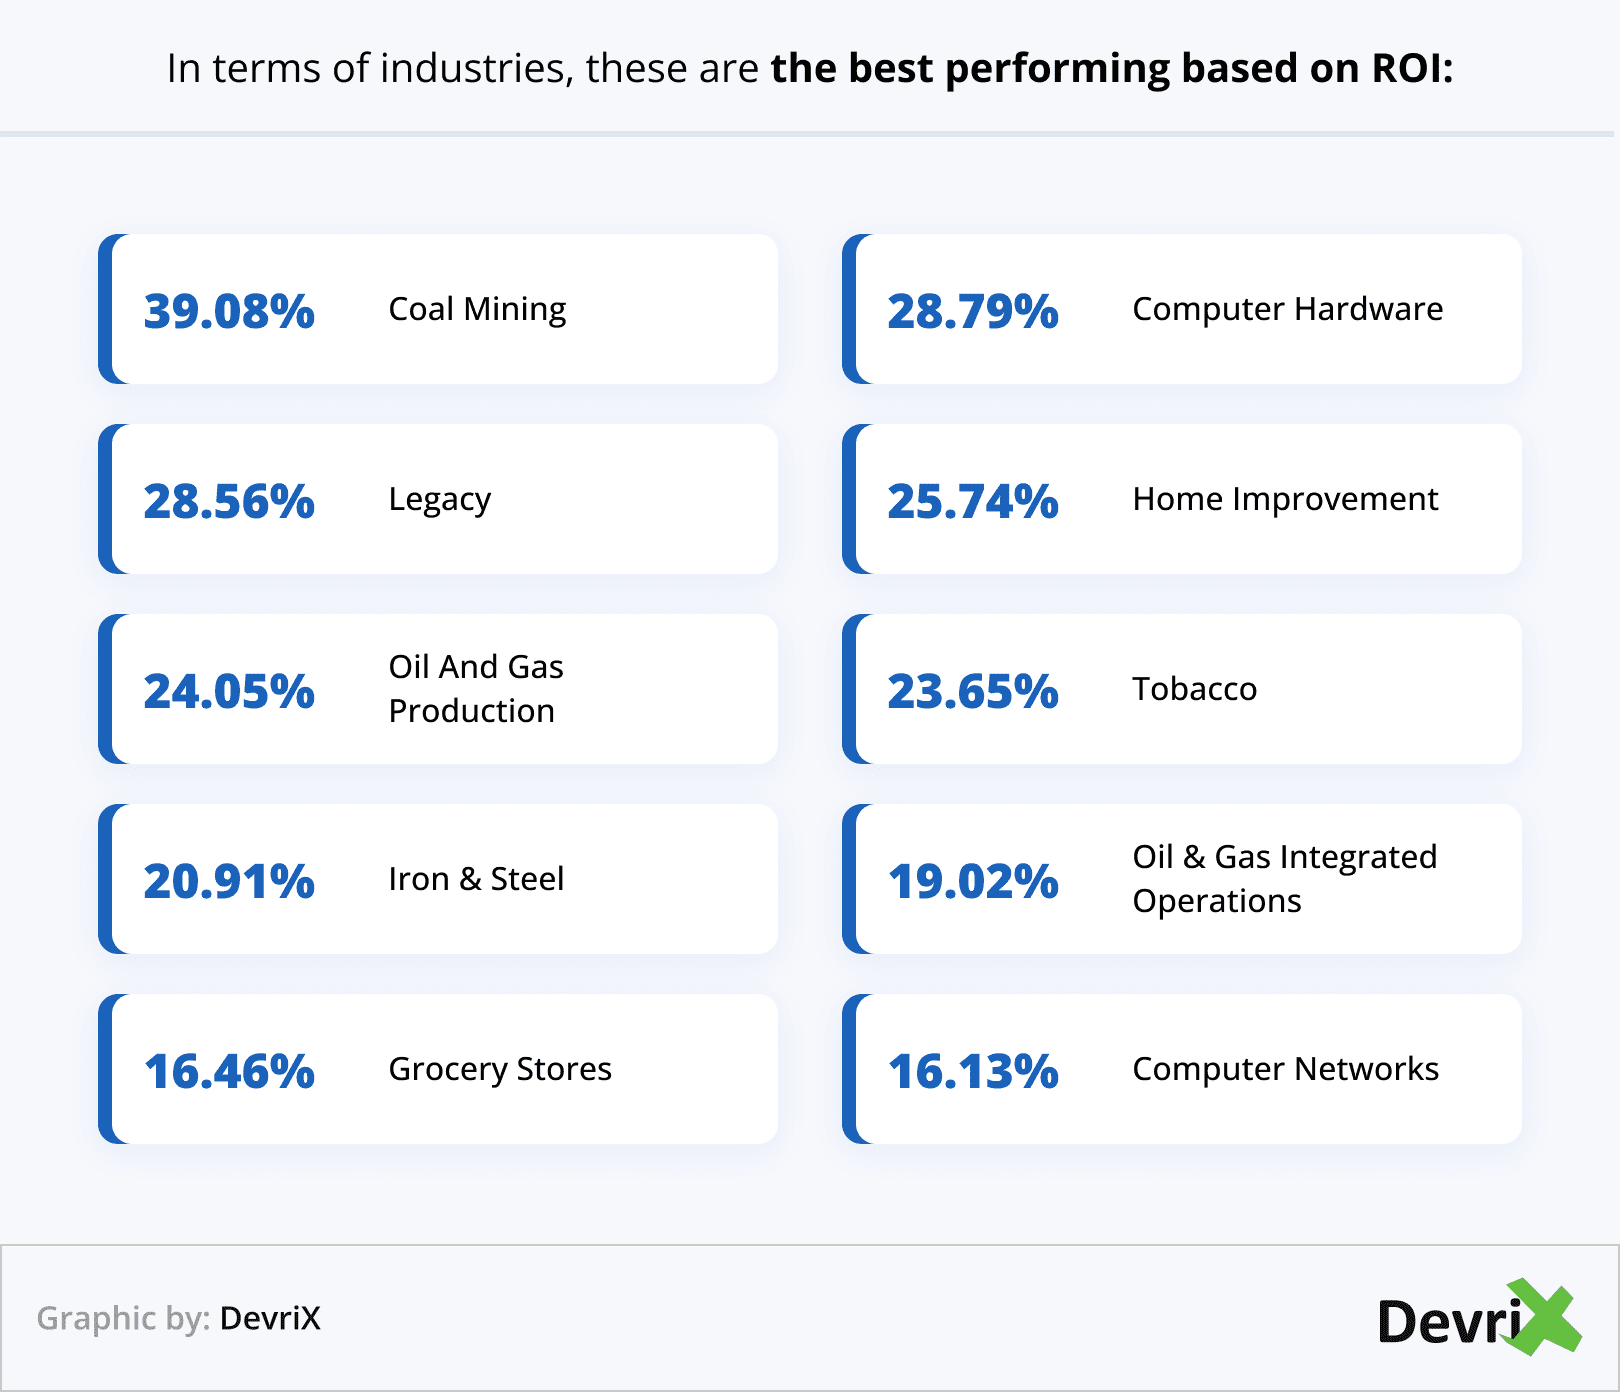 In terms of industries, these are the best performing based on ROI